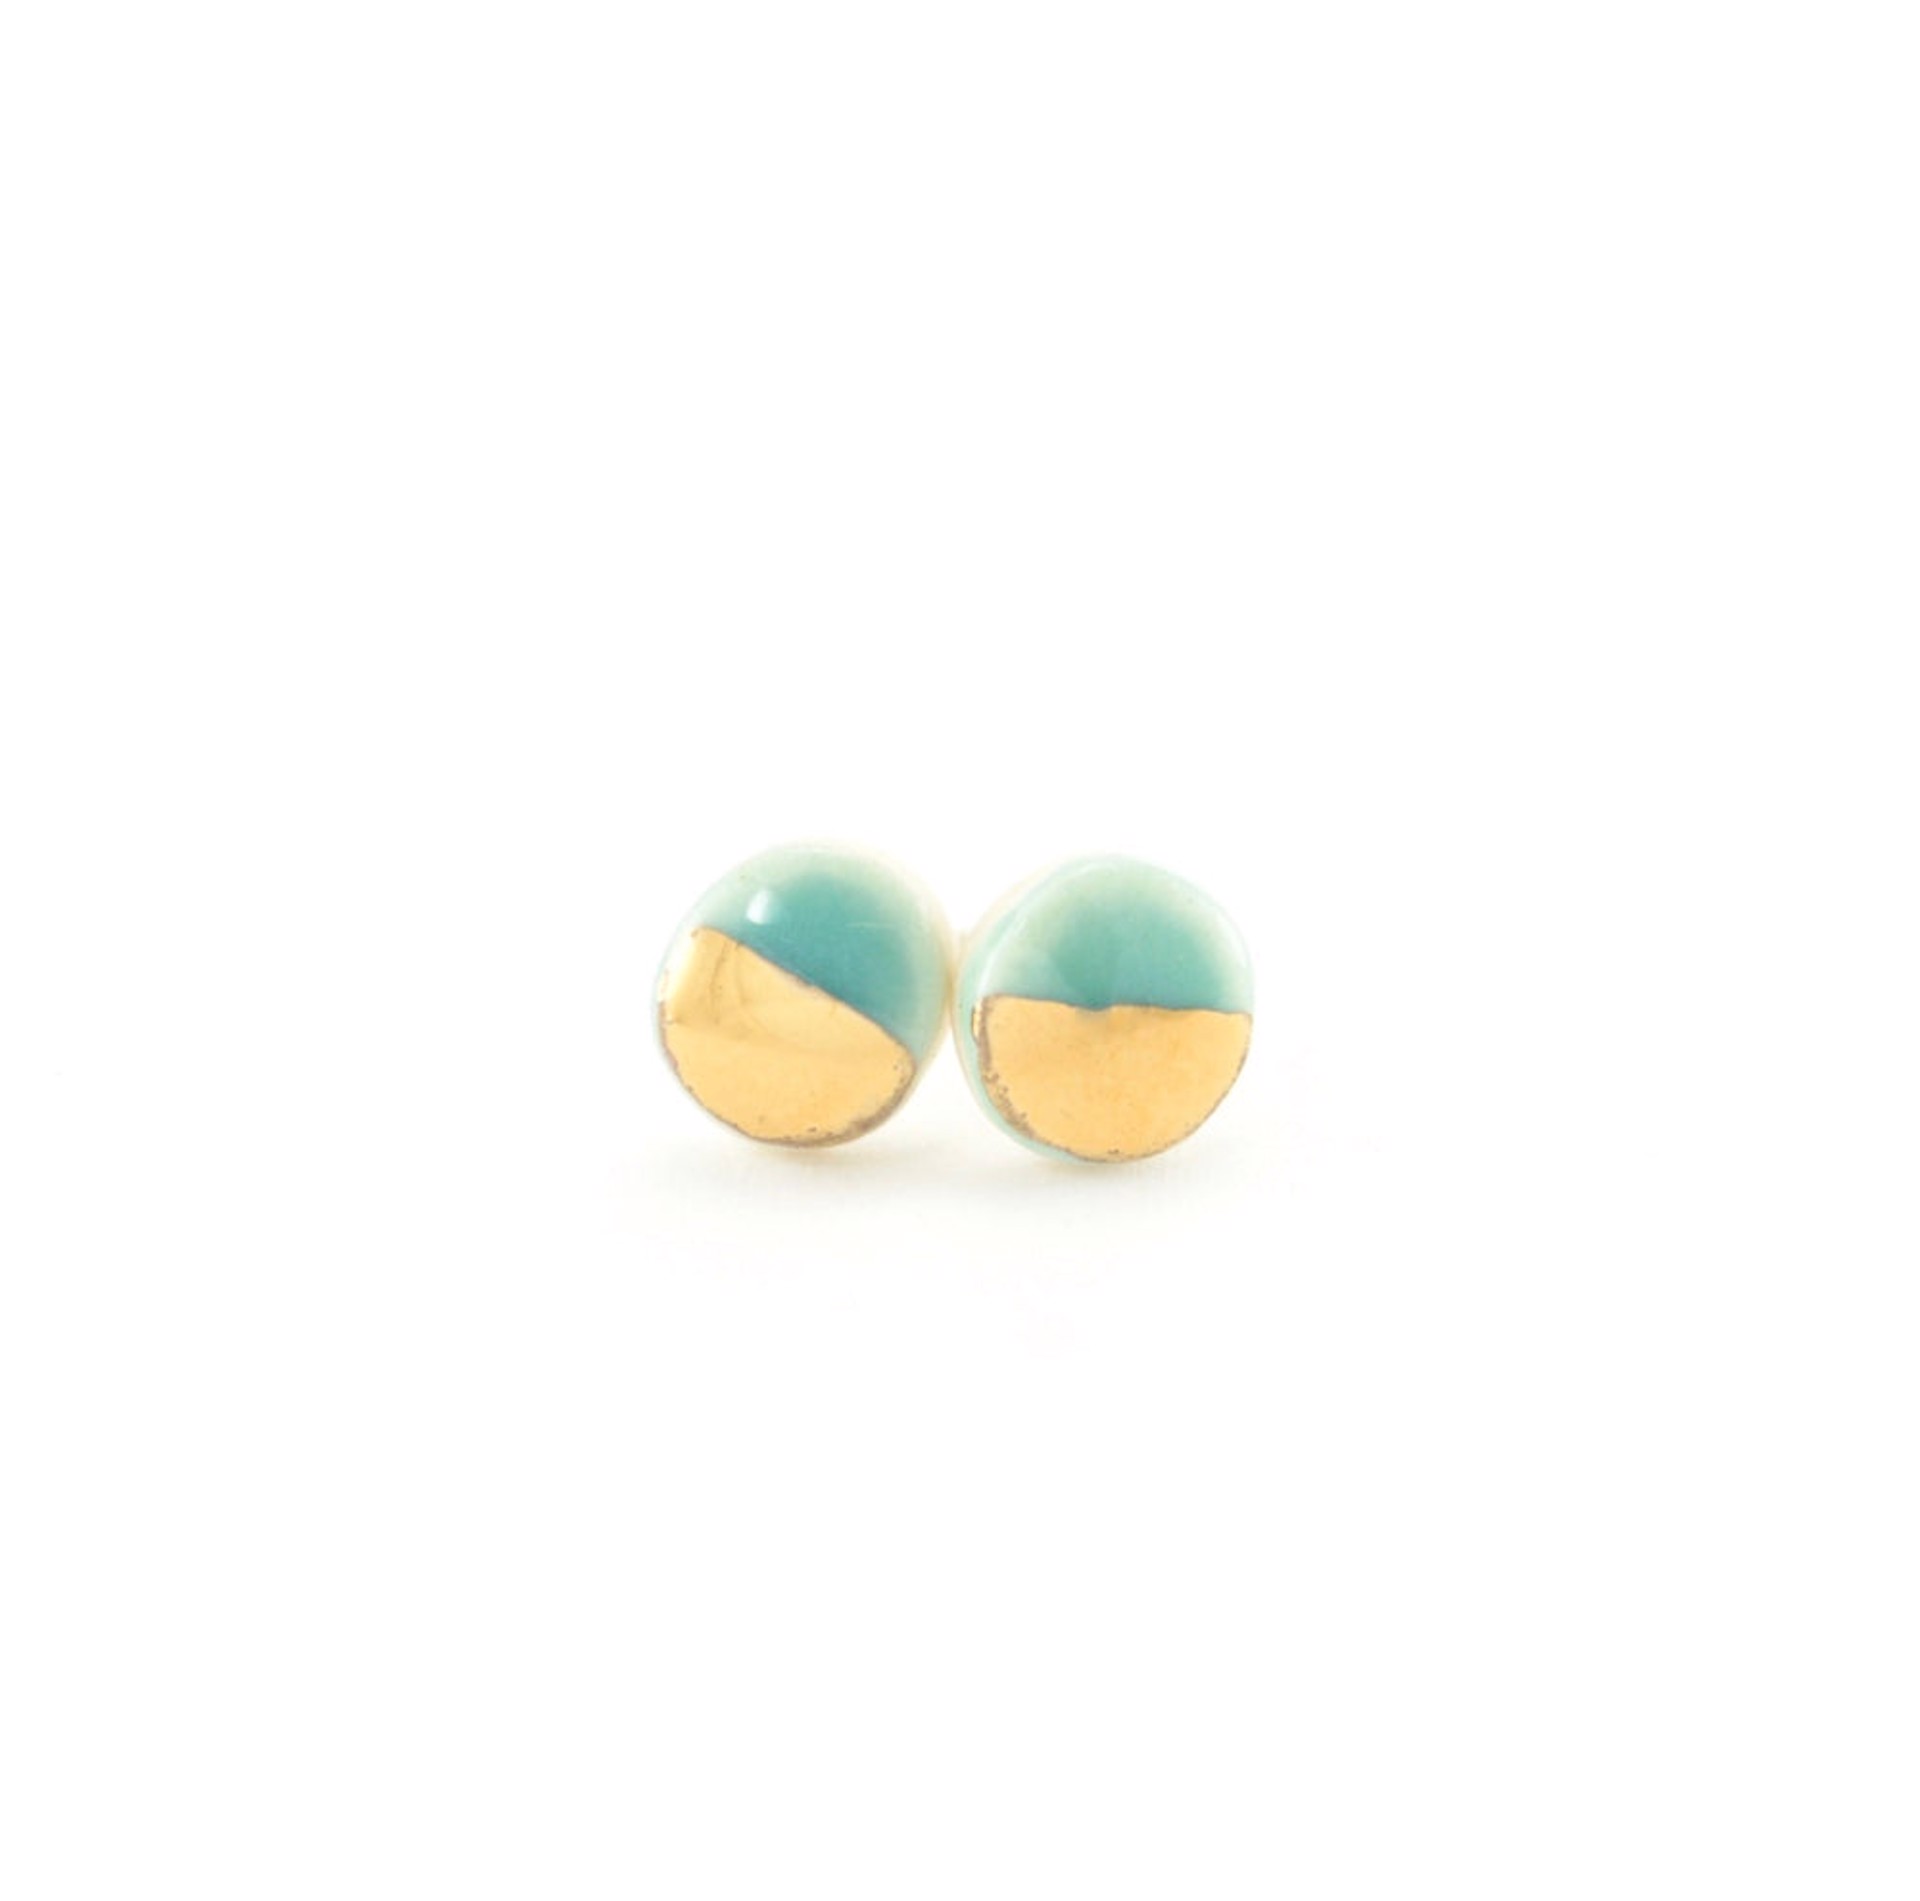 Tiny Pebble Studs - White/Gold by Zoe Comings